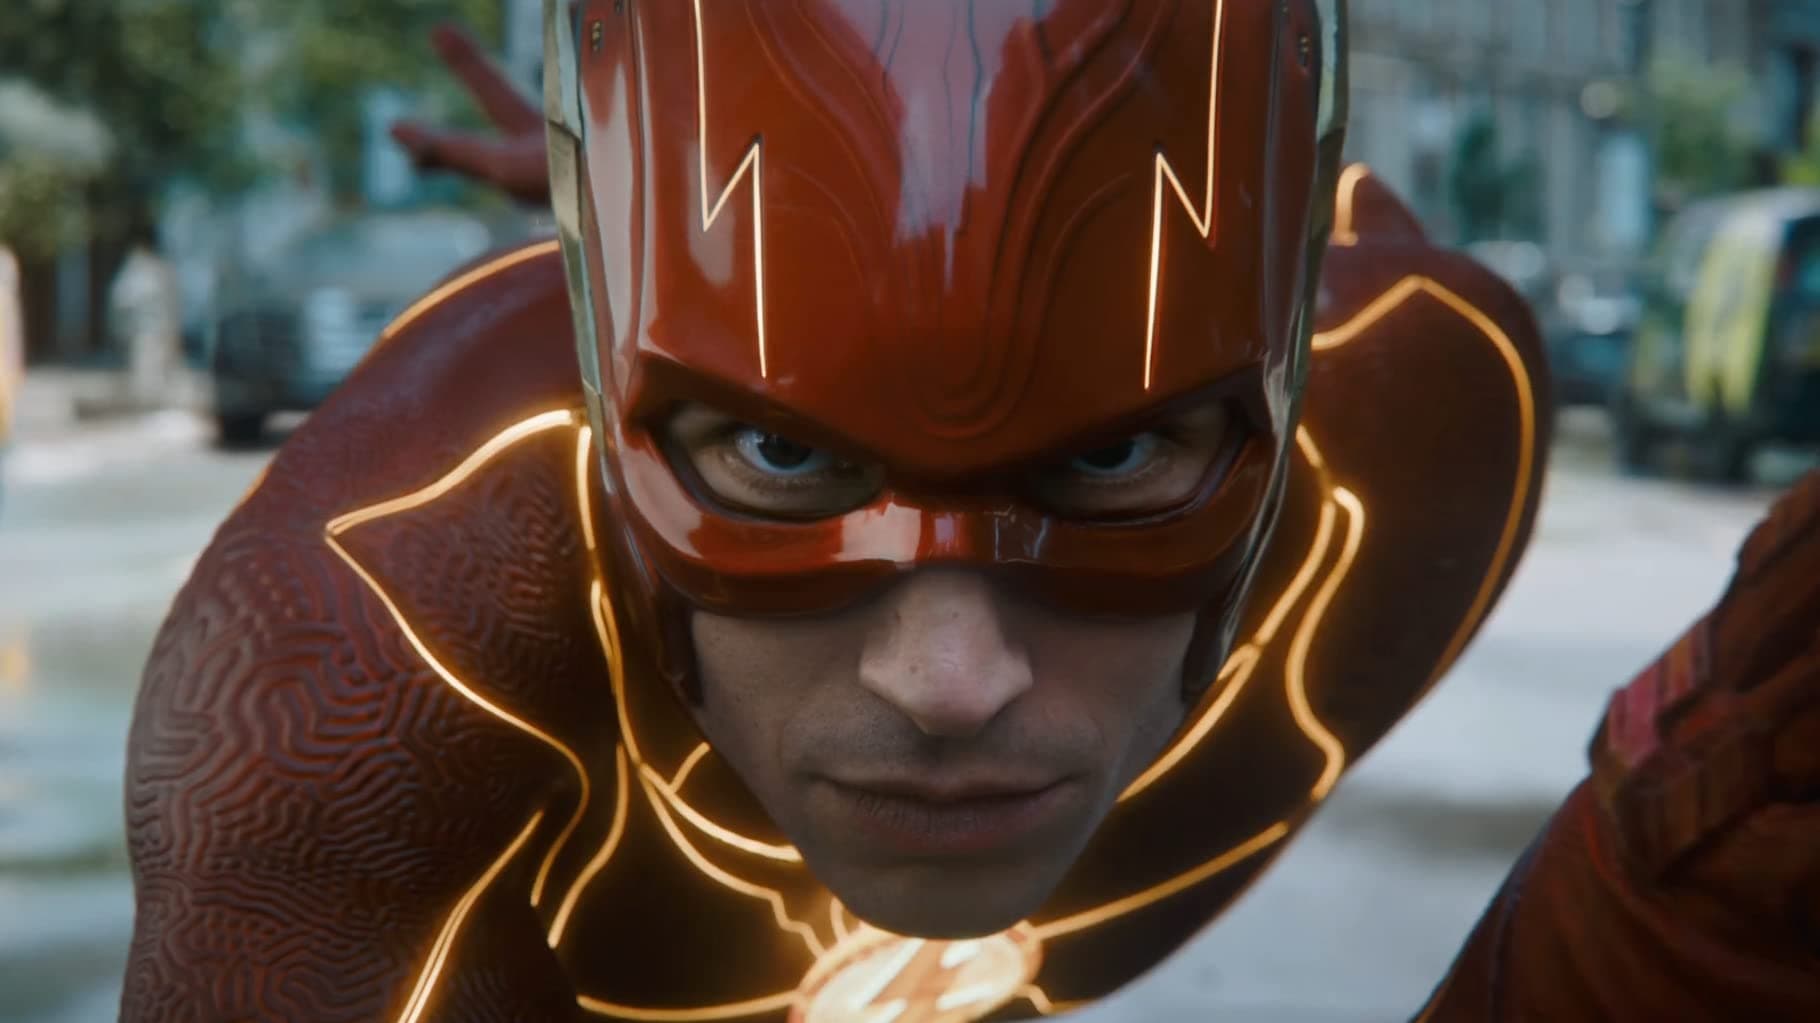 First Trailer for DC Reboot with ‘The Flash’ Showcases Michael Keaton’s Return as Batman